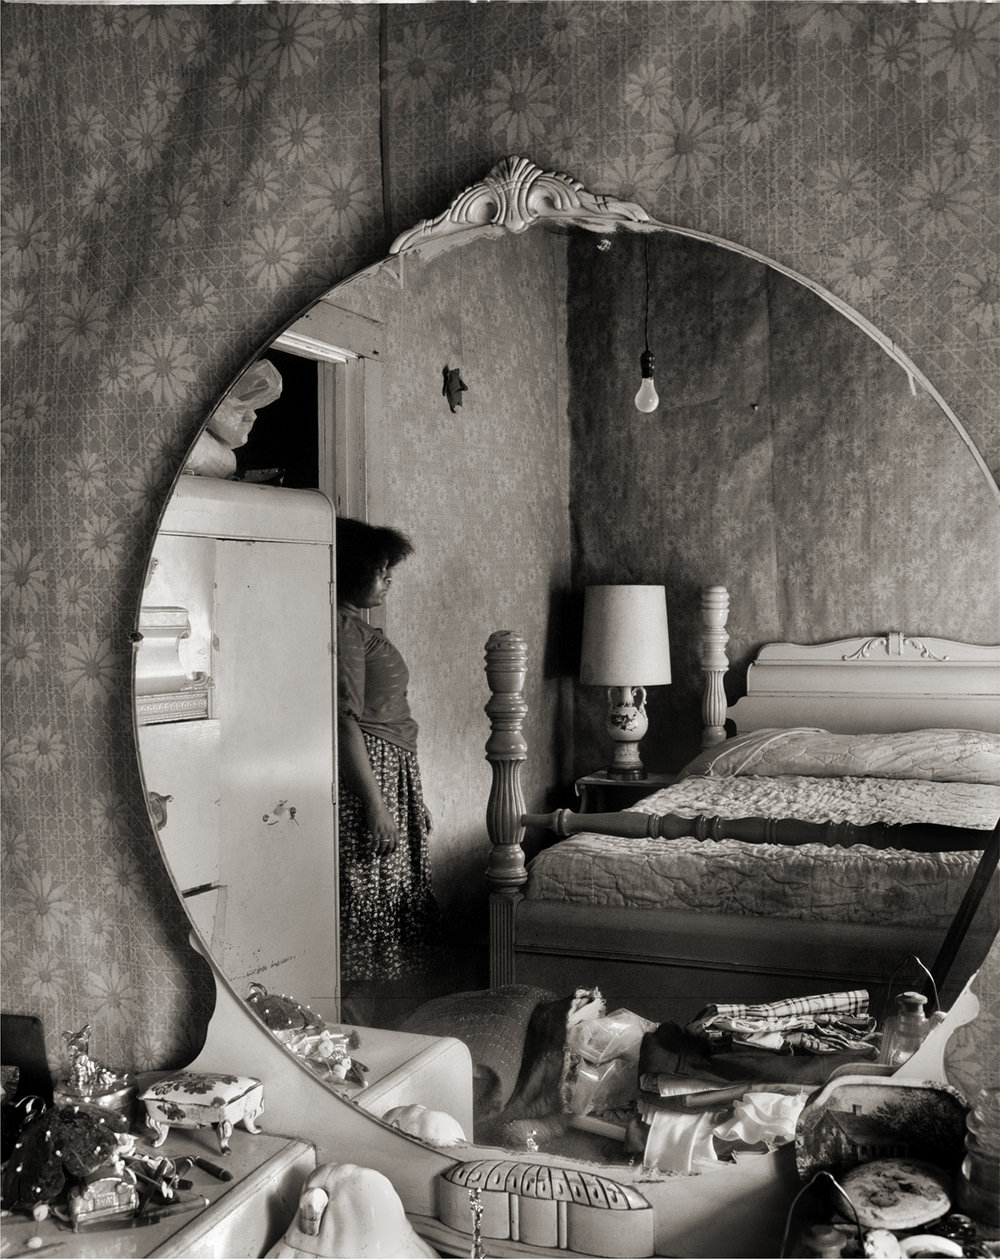   Oglesby Bedroom , Stotesbury, Raleigh County, West Virginia Image: 1982/ printed: 2016 Platinum Print  19 3/4 × 15 3/4 in. (image size) The Do Good Fund, Inc., 2015-082 